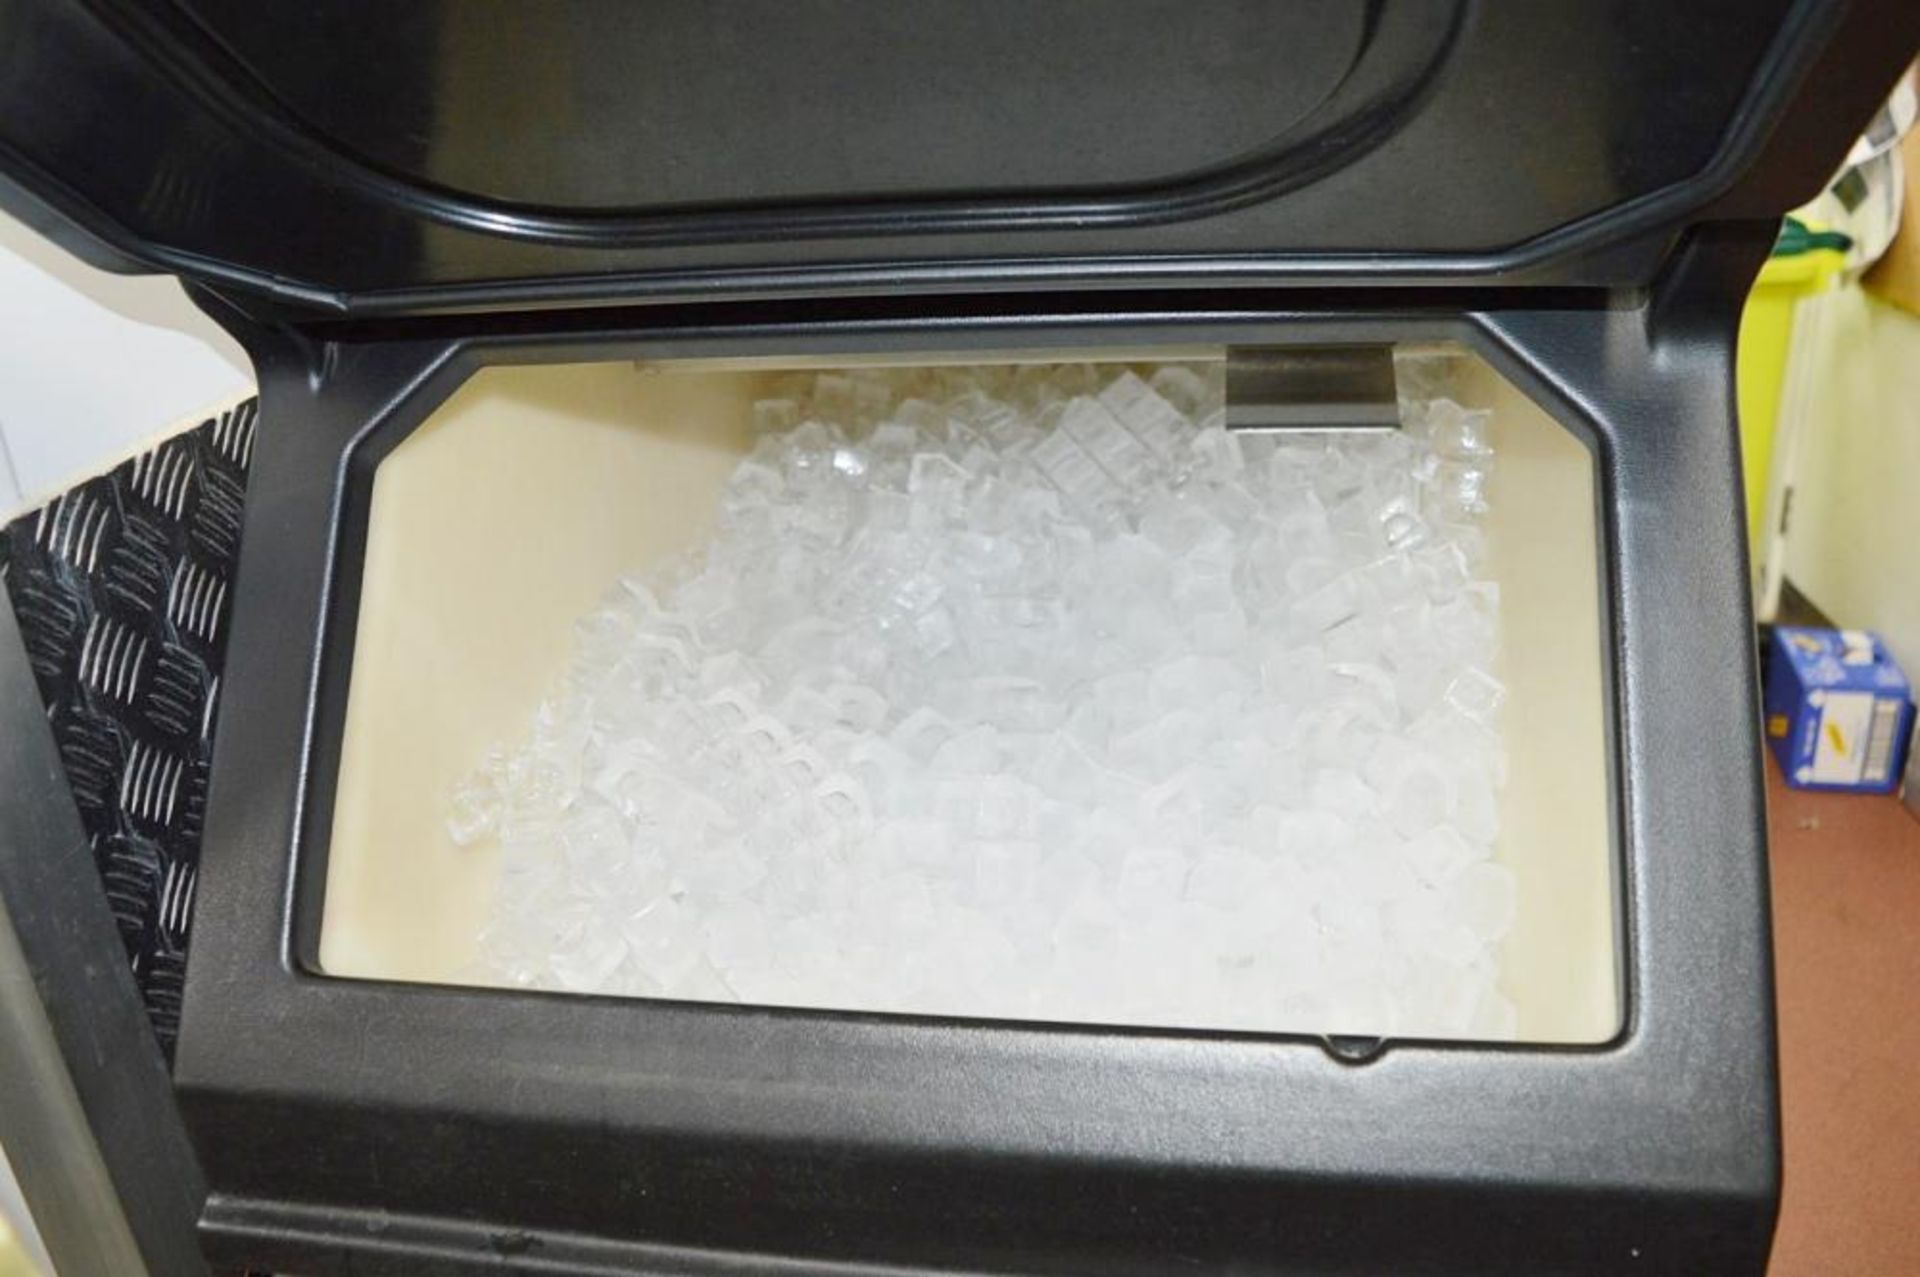 1 x Foster Modular Air-Cooled Ice Cube Maker - Model F132 With SB105 Bin - 130kg Output and 100kg St - Image 9 of 10